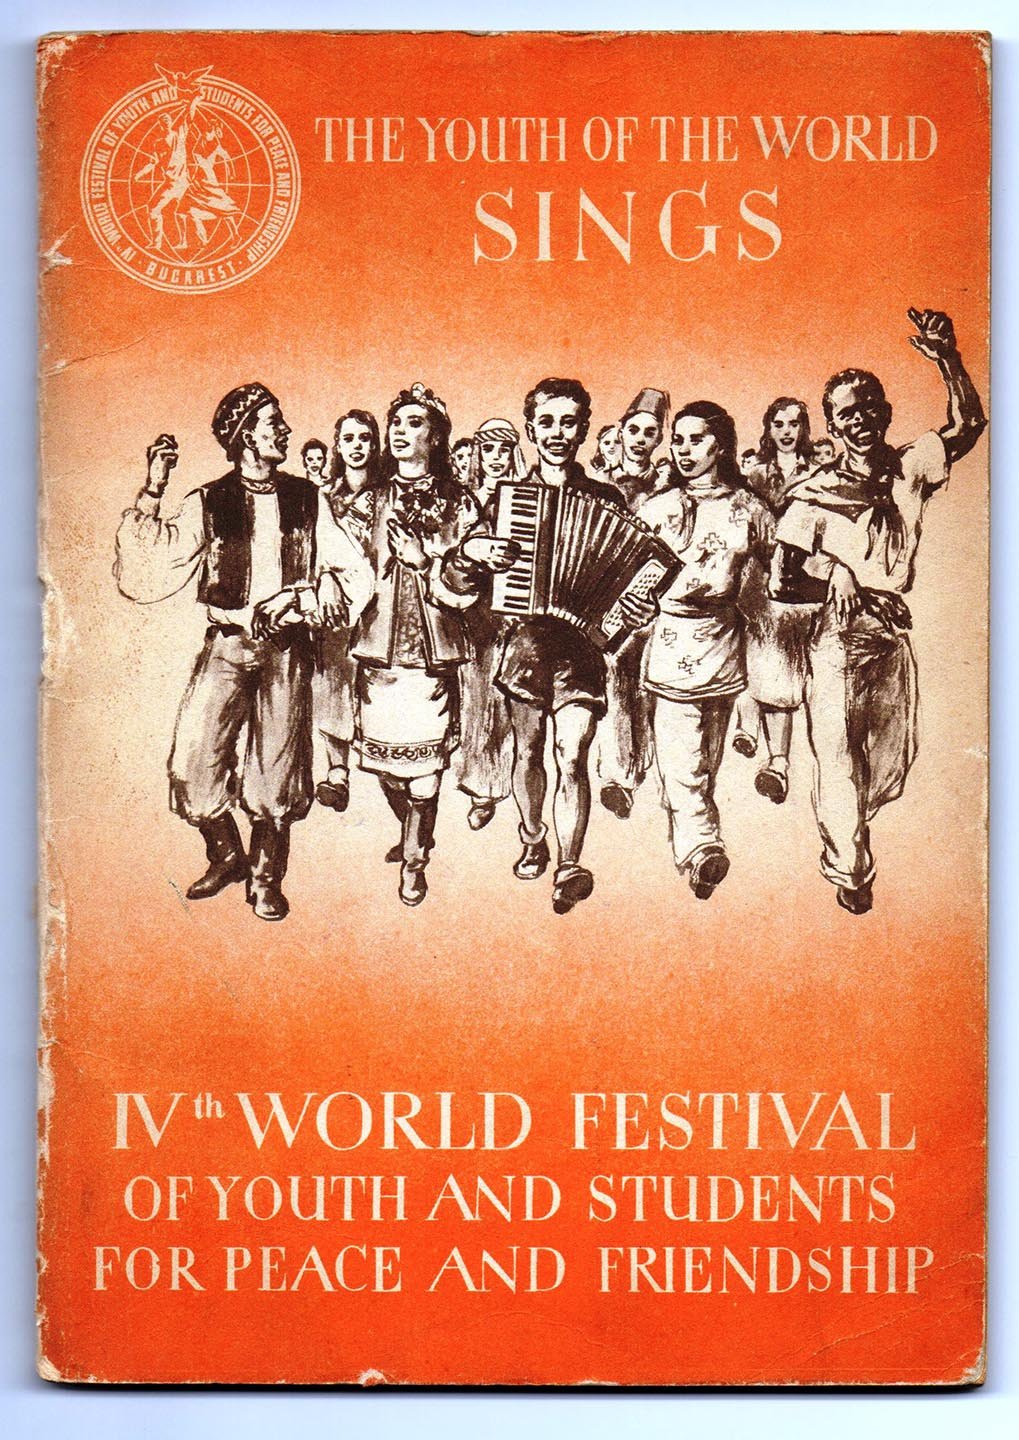 The Youth of the World Sings: IVth World Festival of Youth and Students for Peace and Friendship